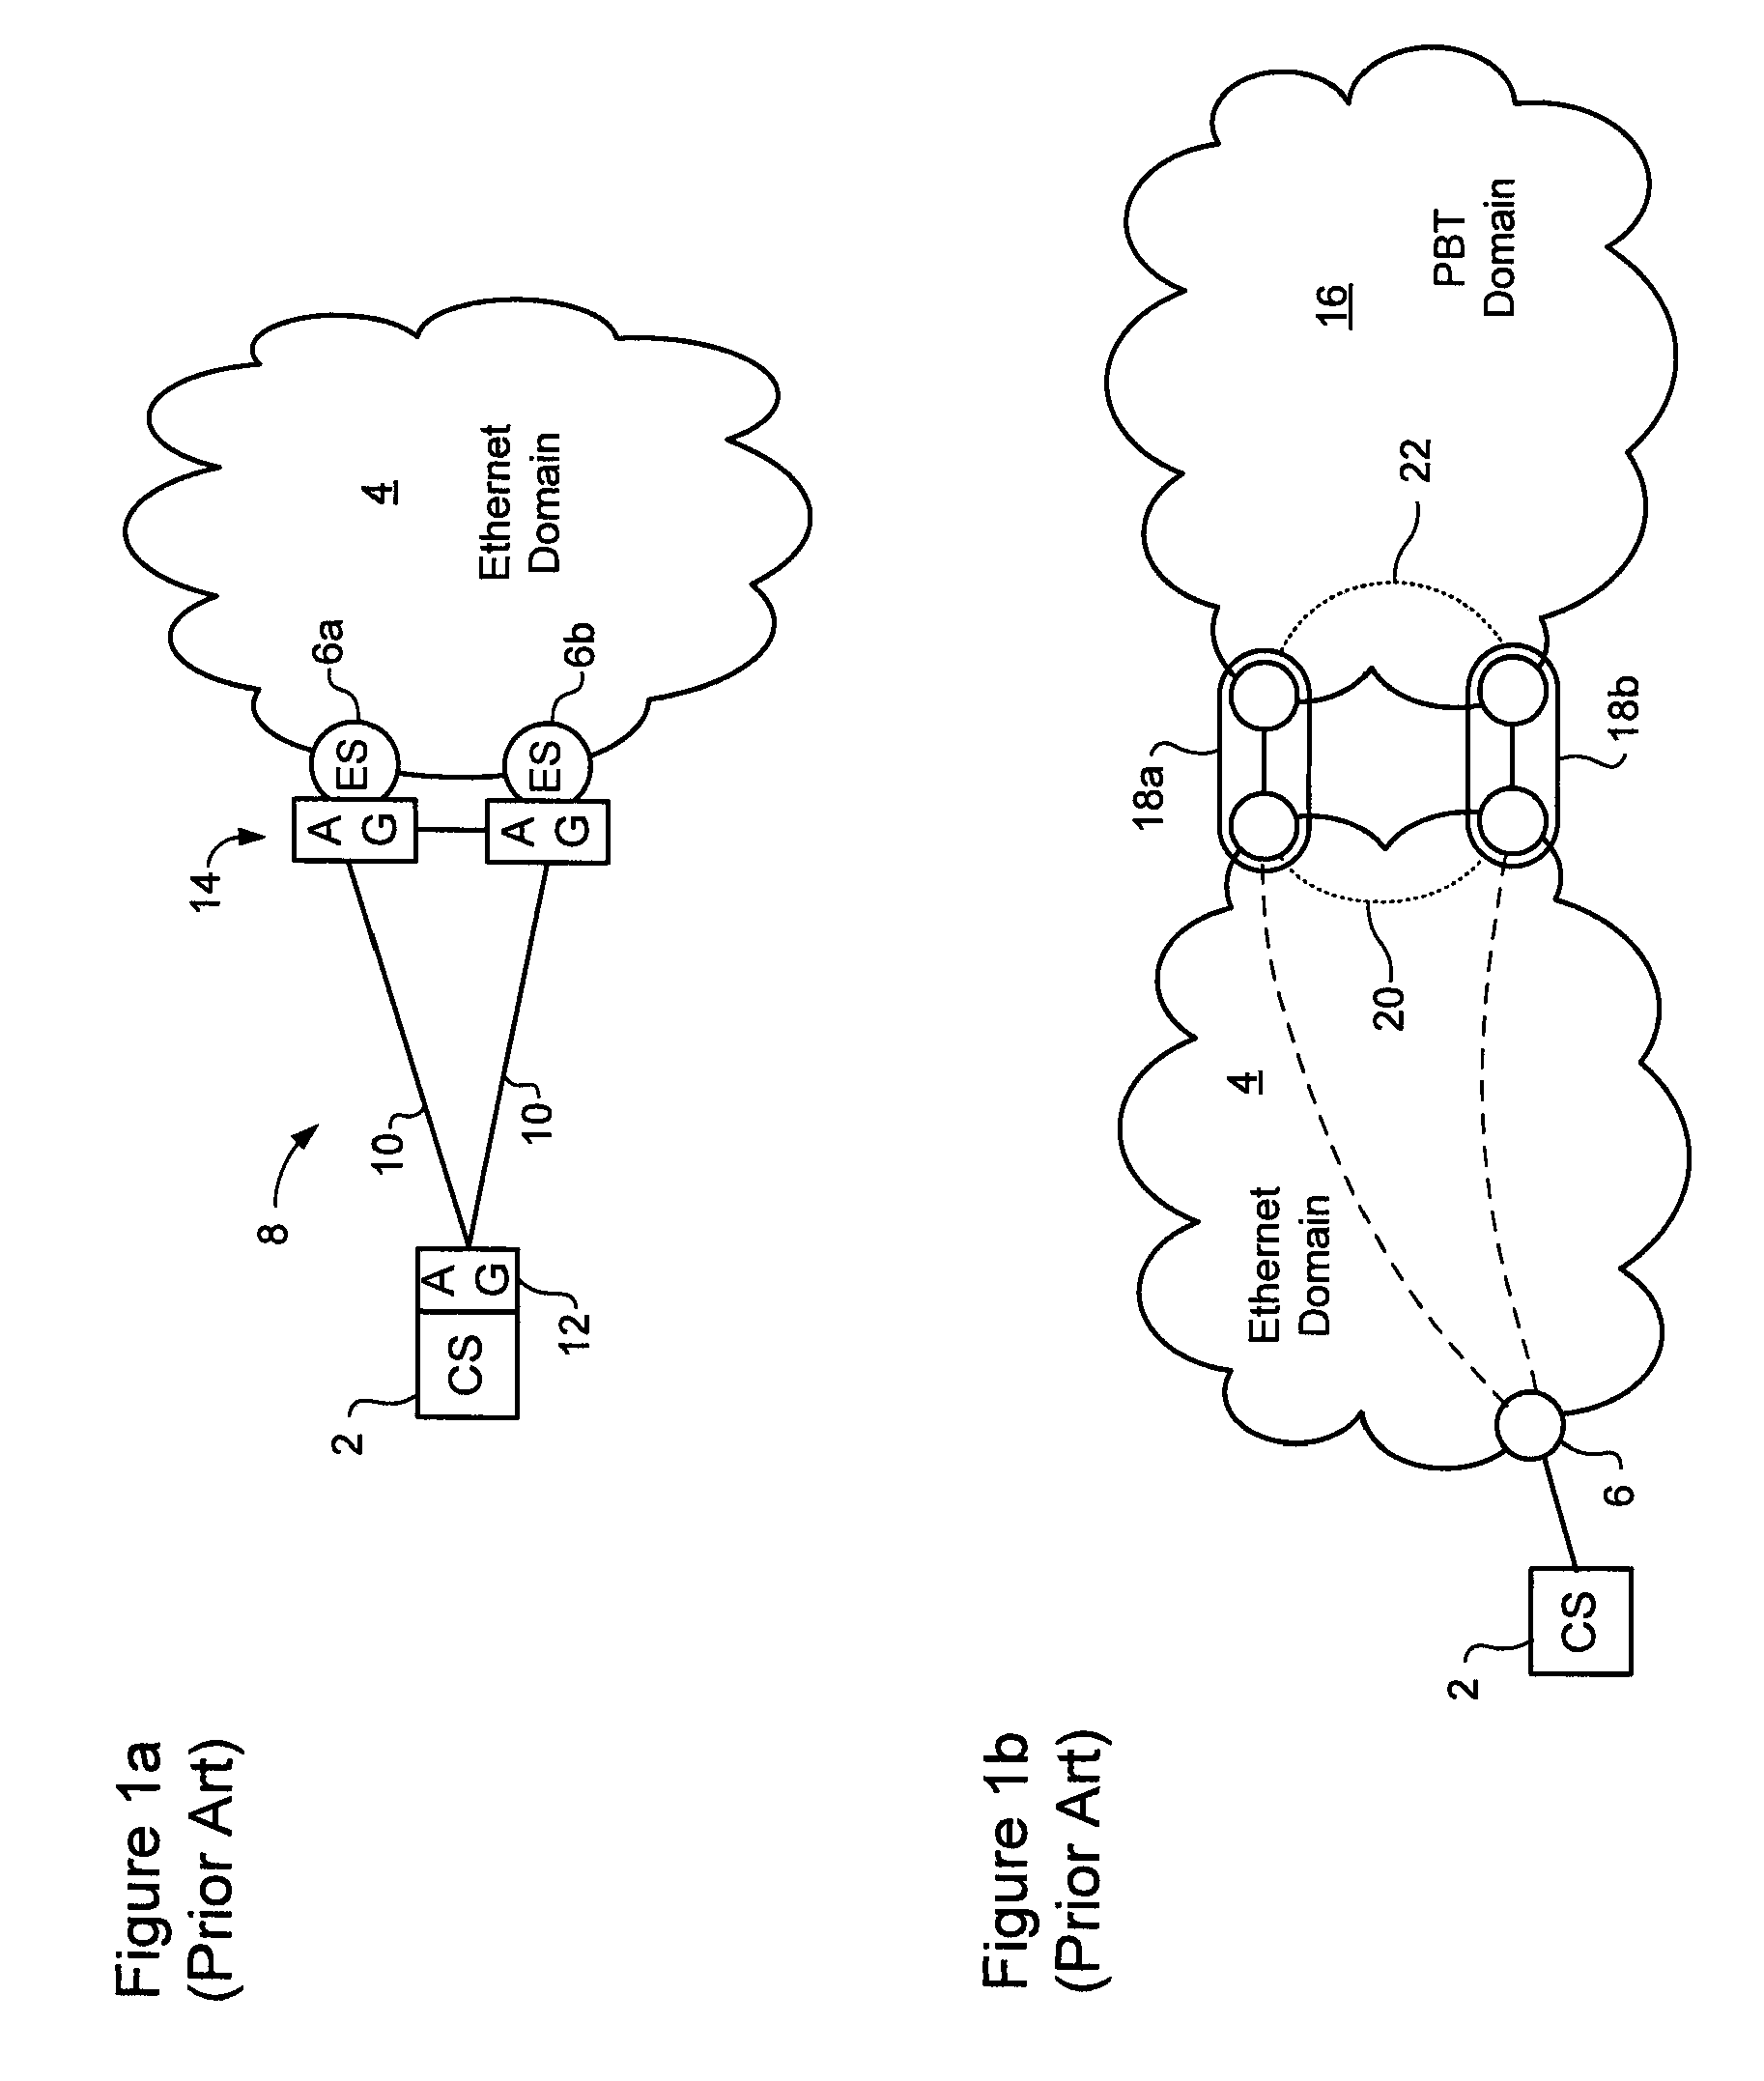 Dual homed e-spring protection for network domain interworking